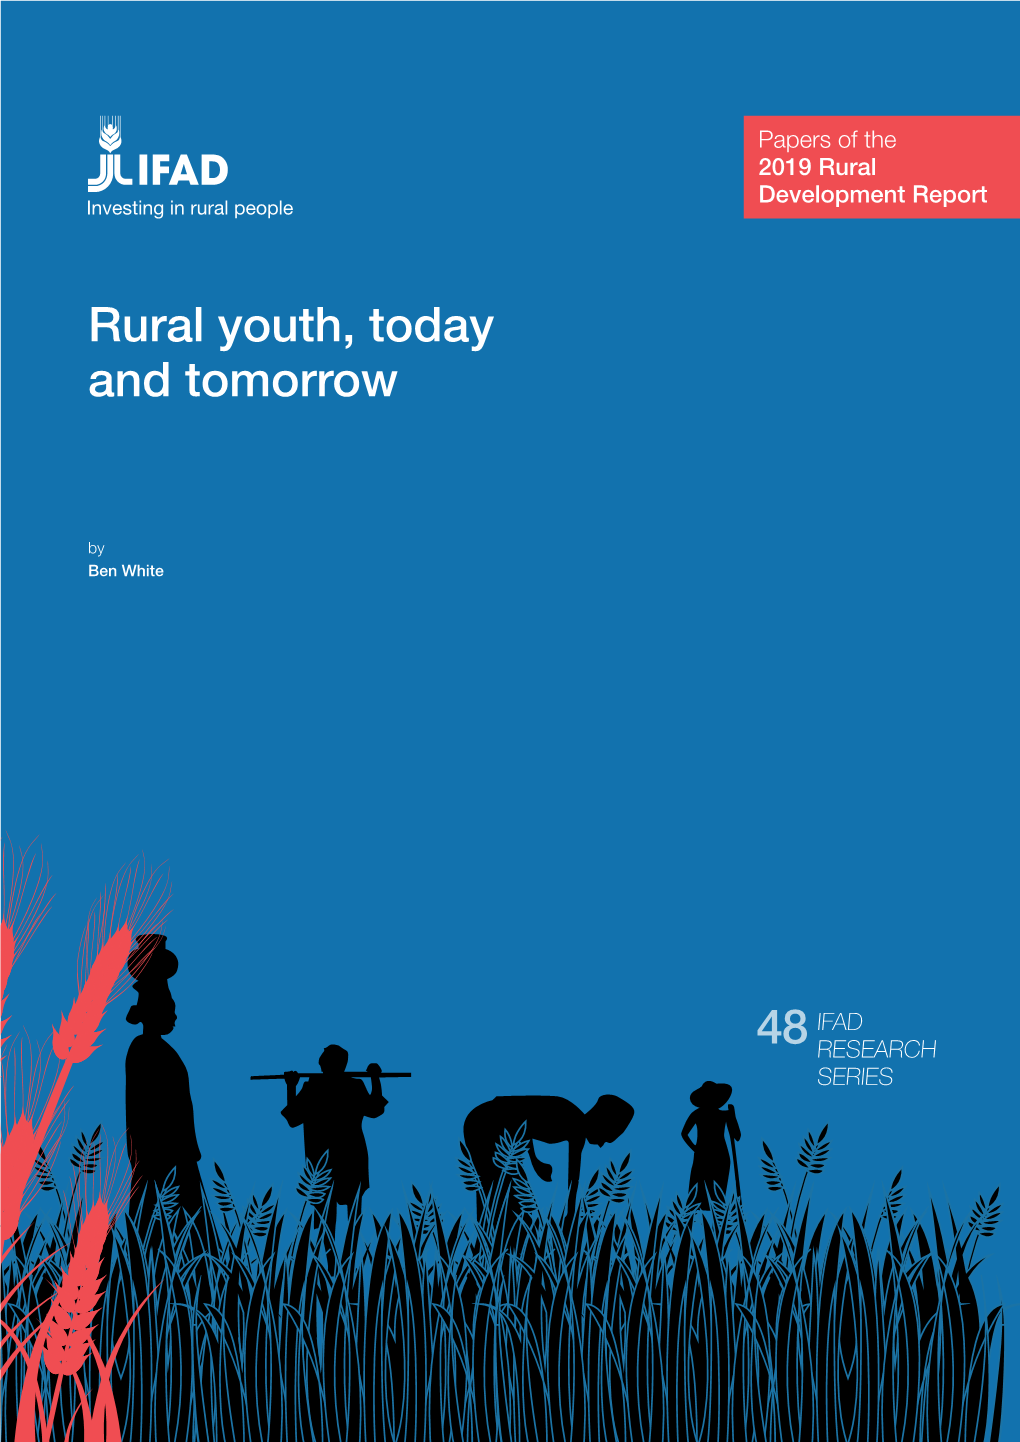 Rural Youth, Today and Tomorrow (Ben White)